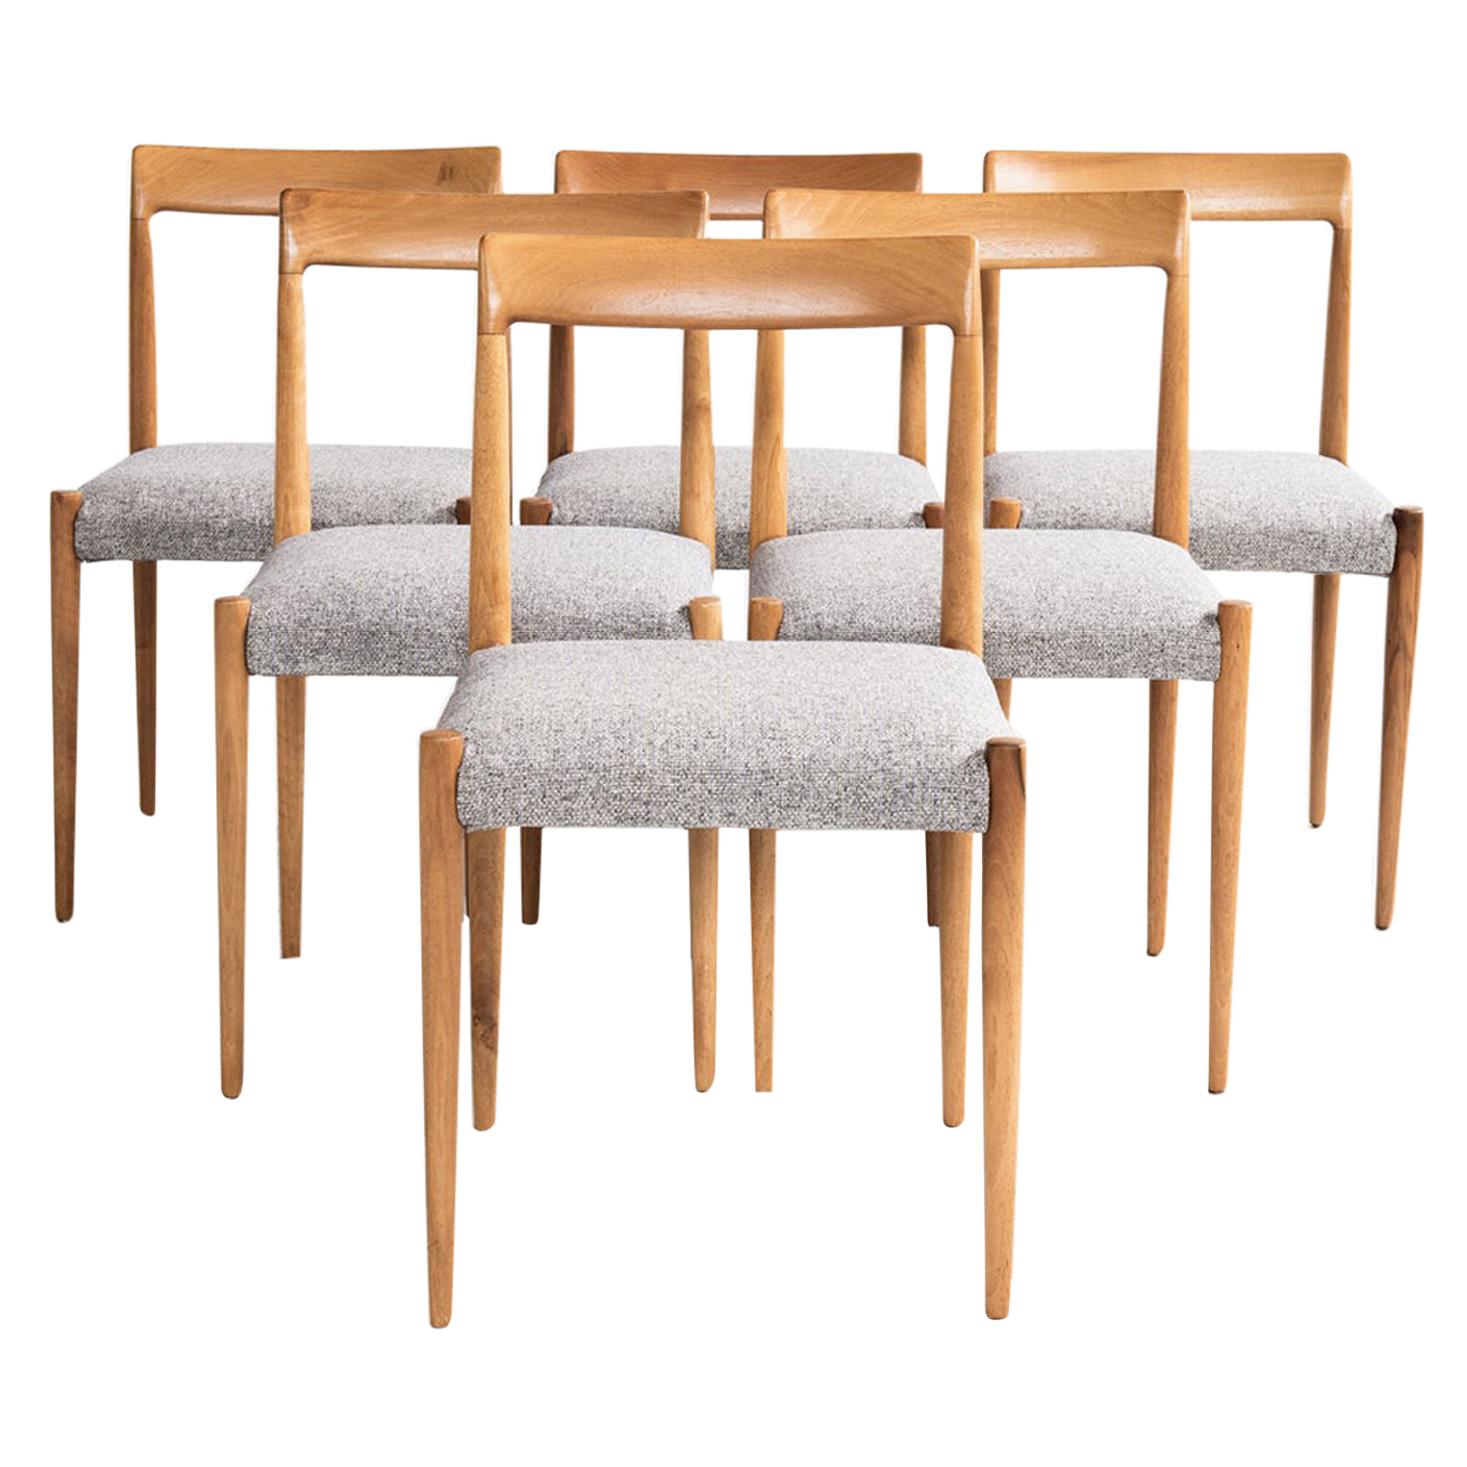 Midcentury Set of 6 Chairs by Lübke in Solid Wood with New Grey Fabric